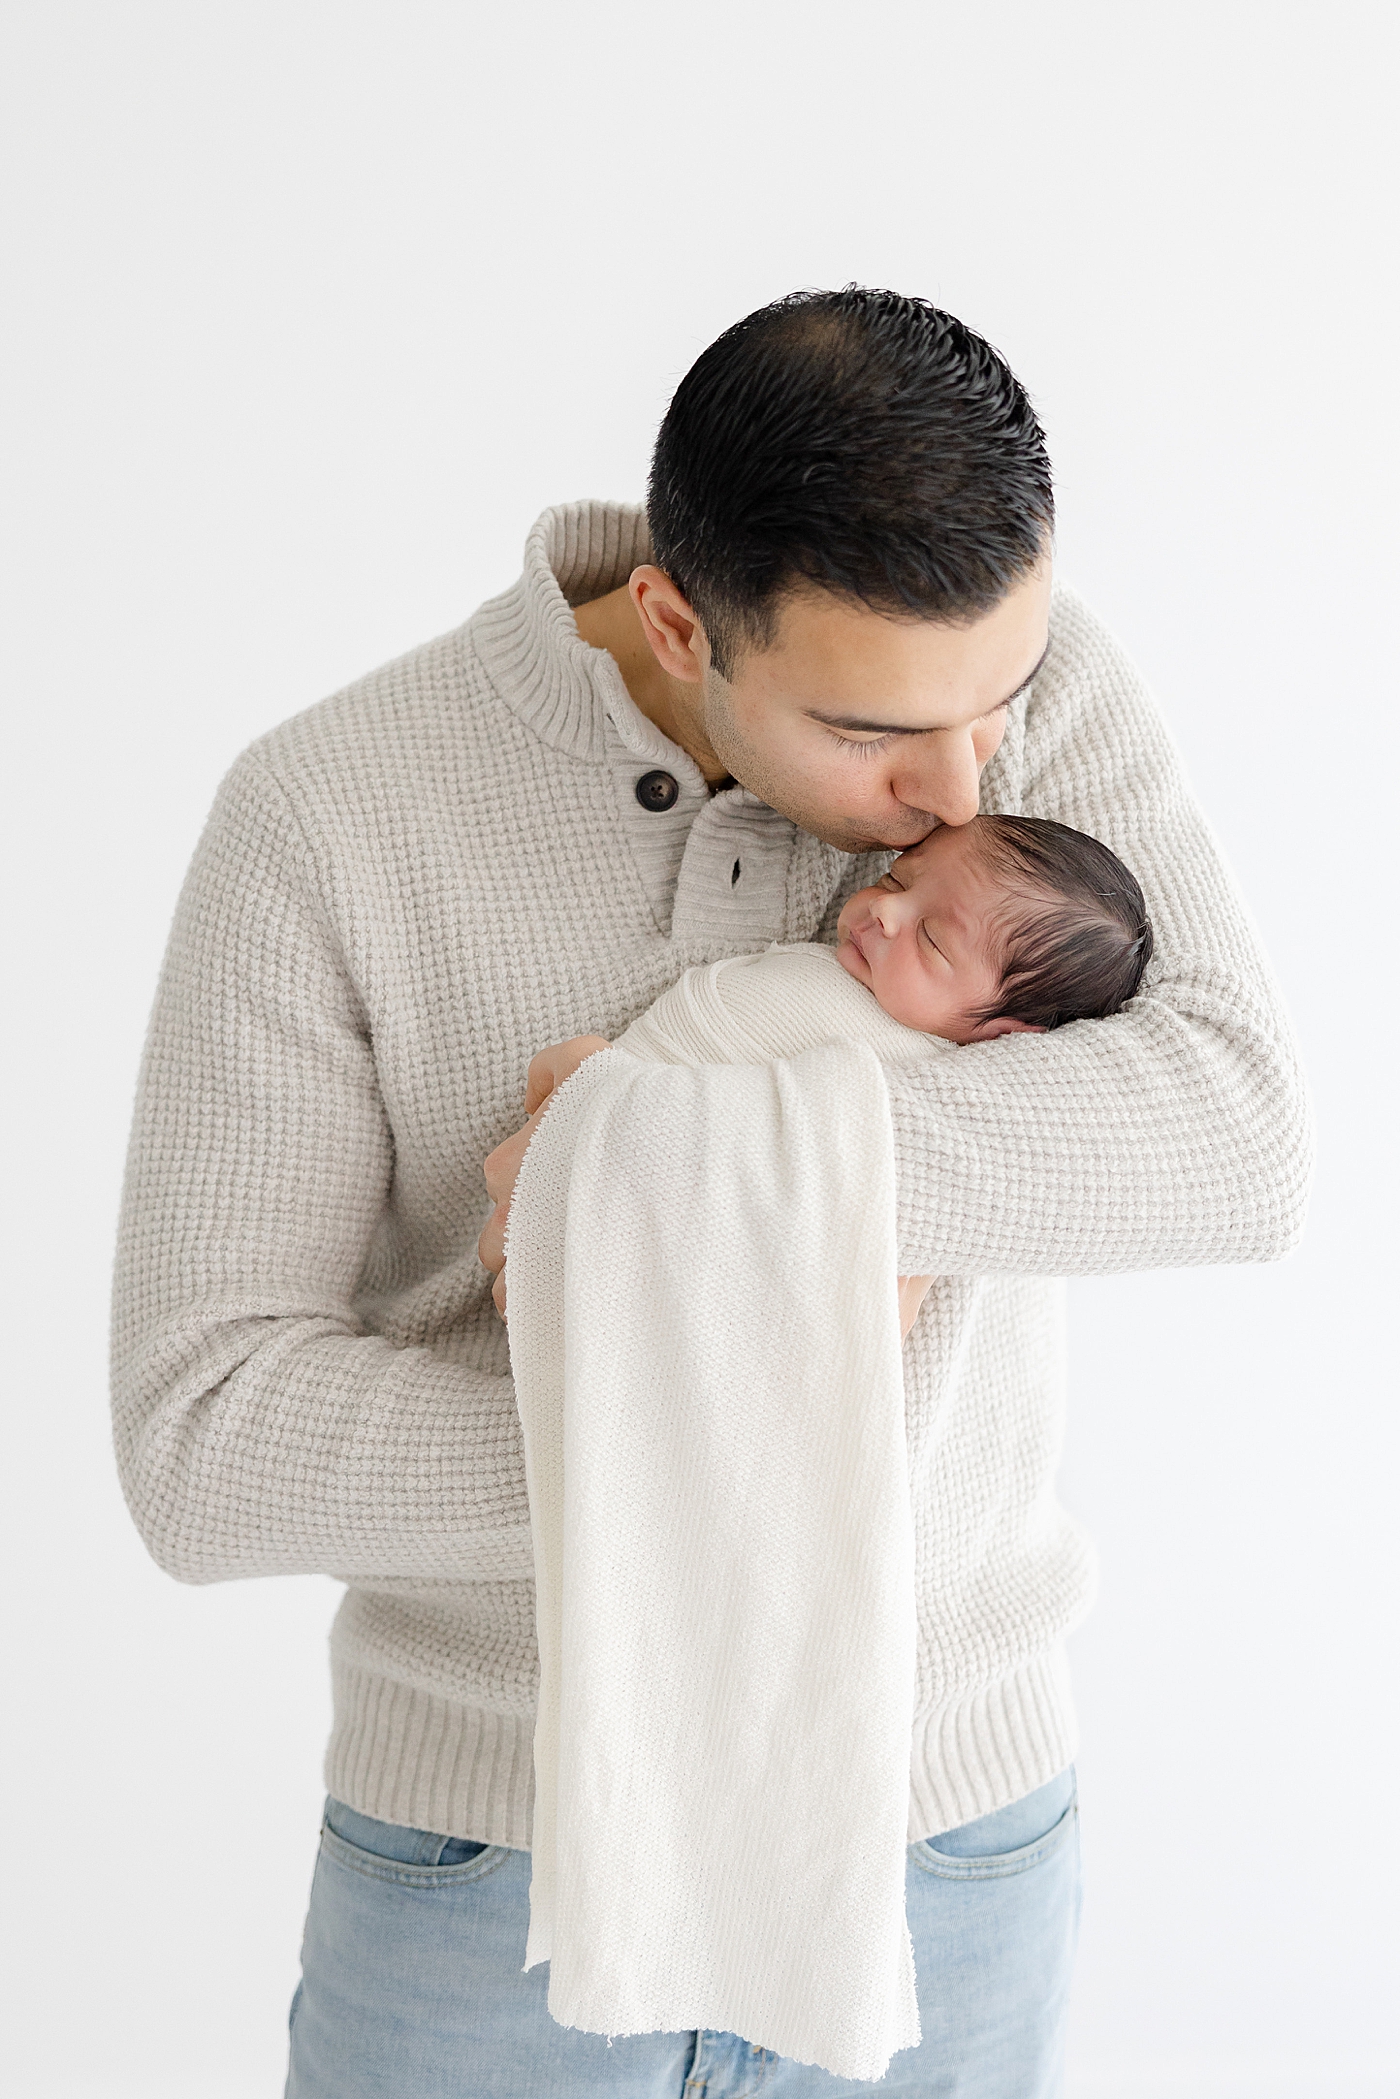 Dad kissing his sleeping baby during their Studio Newborn Session in Austin | Image by Sana Ahmed Photography 